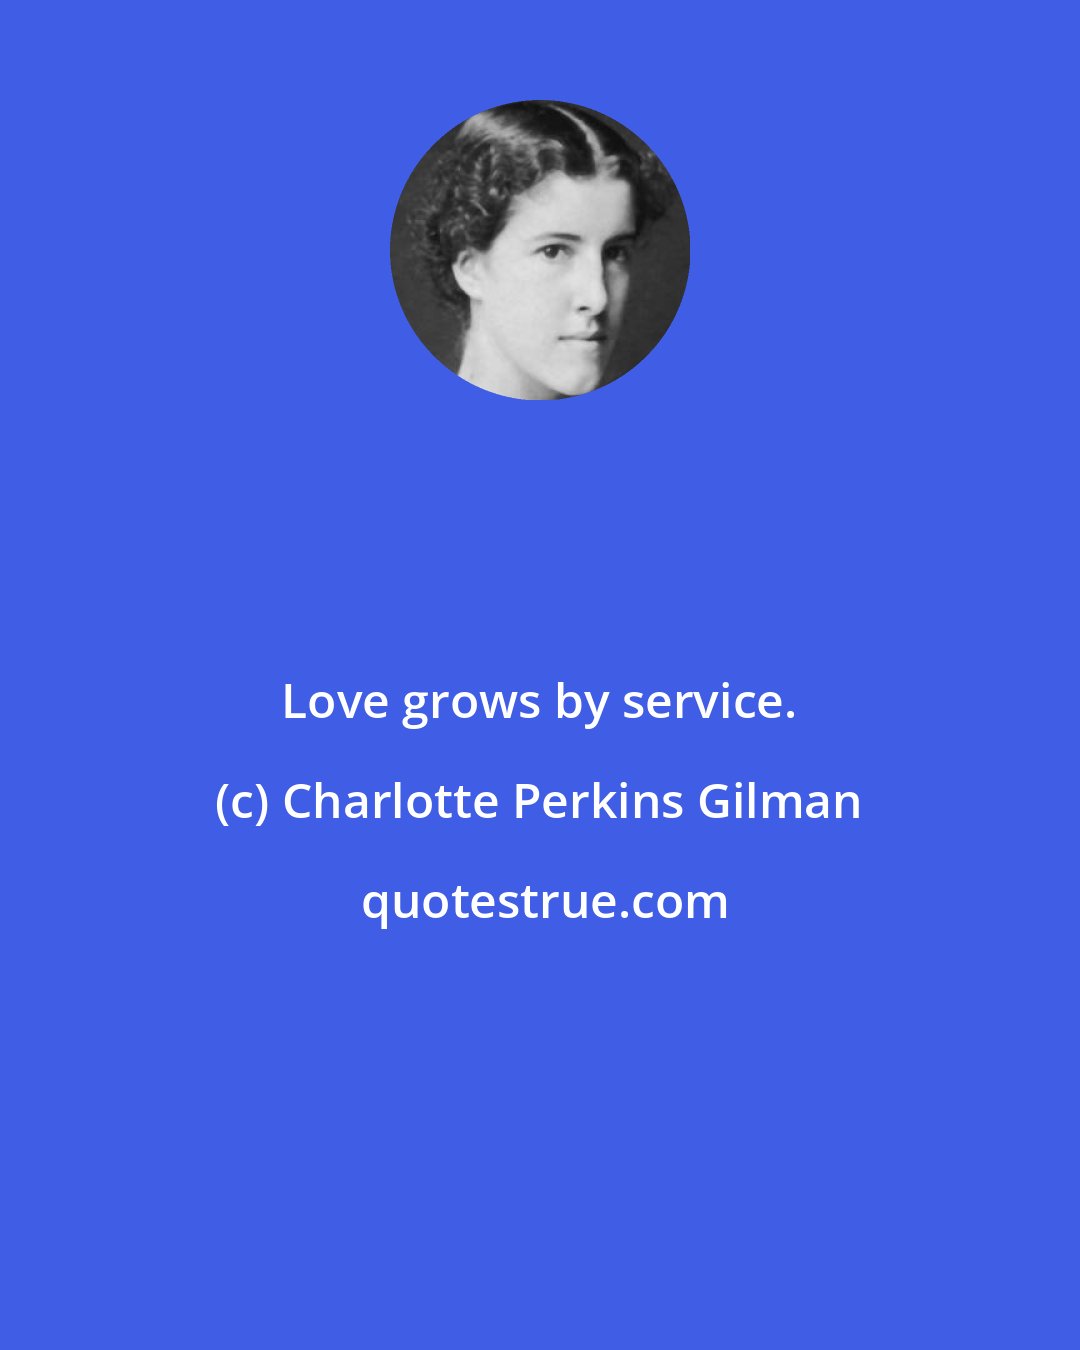 Charlotte Perkins Gilman: Love grows by service.